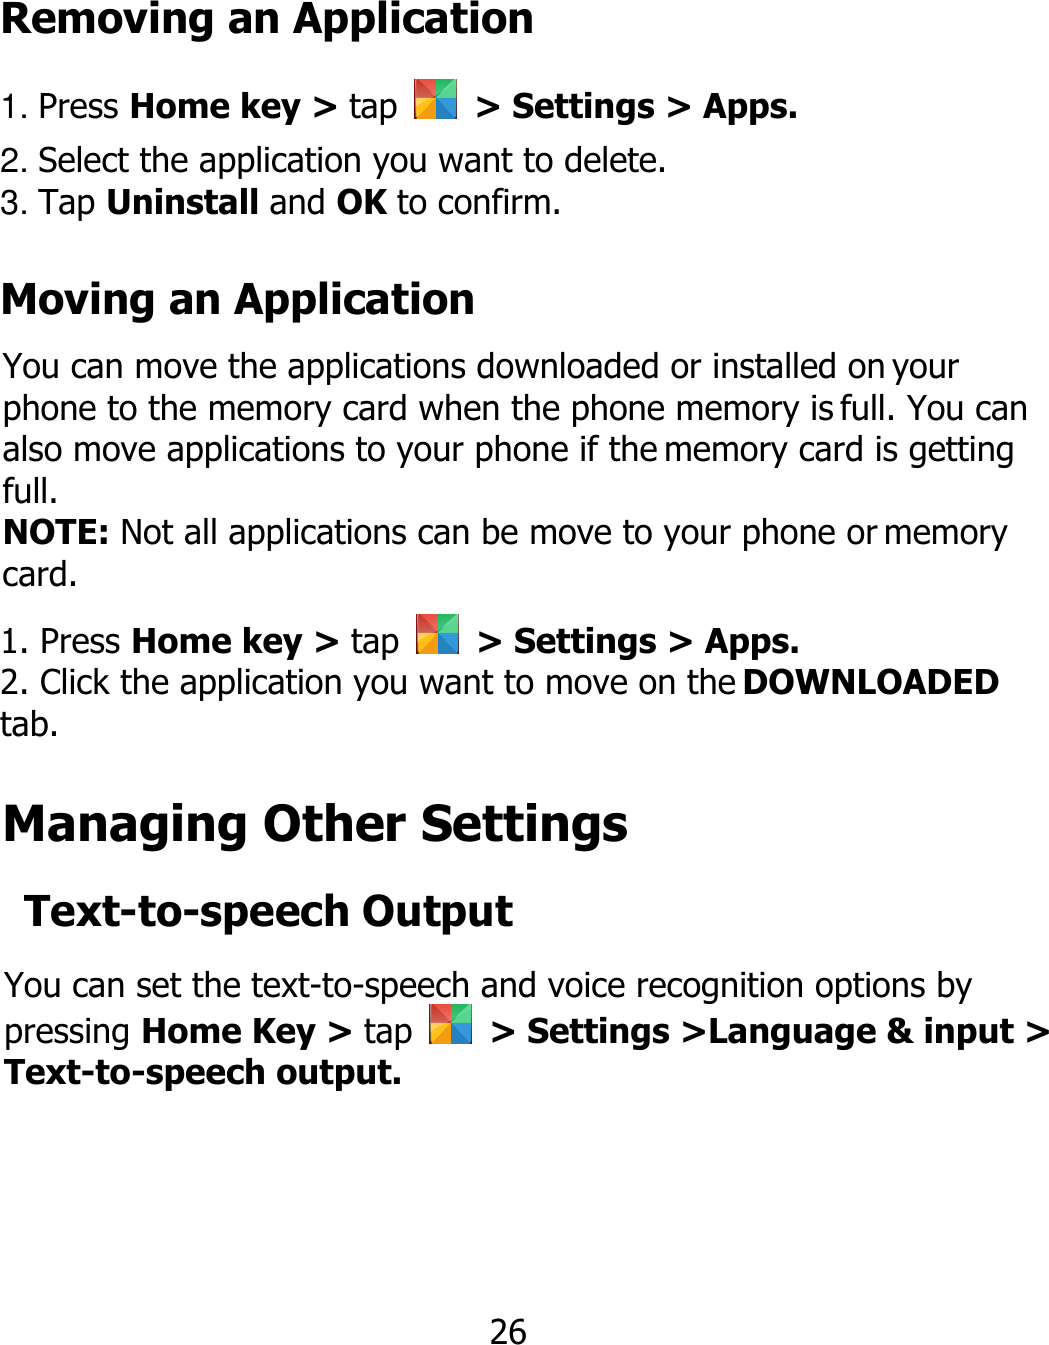 Removing an Application 1. Press Home key &gt; tap    &gt; Settings &gt; Apps. 2. Select the application you want to delete. 3. Tap Uninstall and OK to confirm. Moving an Application You can move the applications downloaded or installed on your phone to the memory card when the phone memory is full. You can also move applications to your phone if the memory card is getting full. NOTE: Not all applications can be move to your phone or memory card. 1. Press Home key &gt; tap    &gt; Settings &gt; Apps. 2. Click the application you want to move on the DOWNLOADED tab. Managing Other Settings Text-to-speech Output You can set the text-to-speech and voice recognition options by pressing Home Key &gt; tap    &gt; Settings &gt;Language &amp; input &gt; Text-to-speech output. 26 